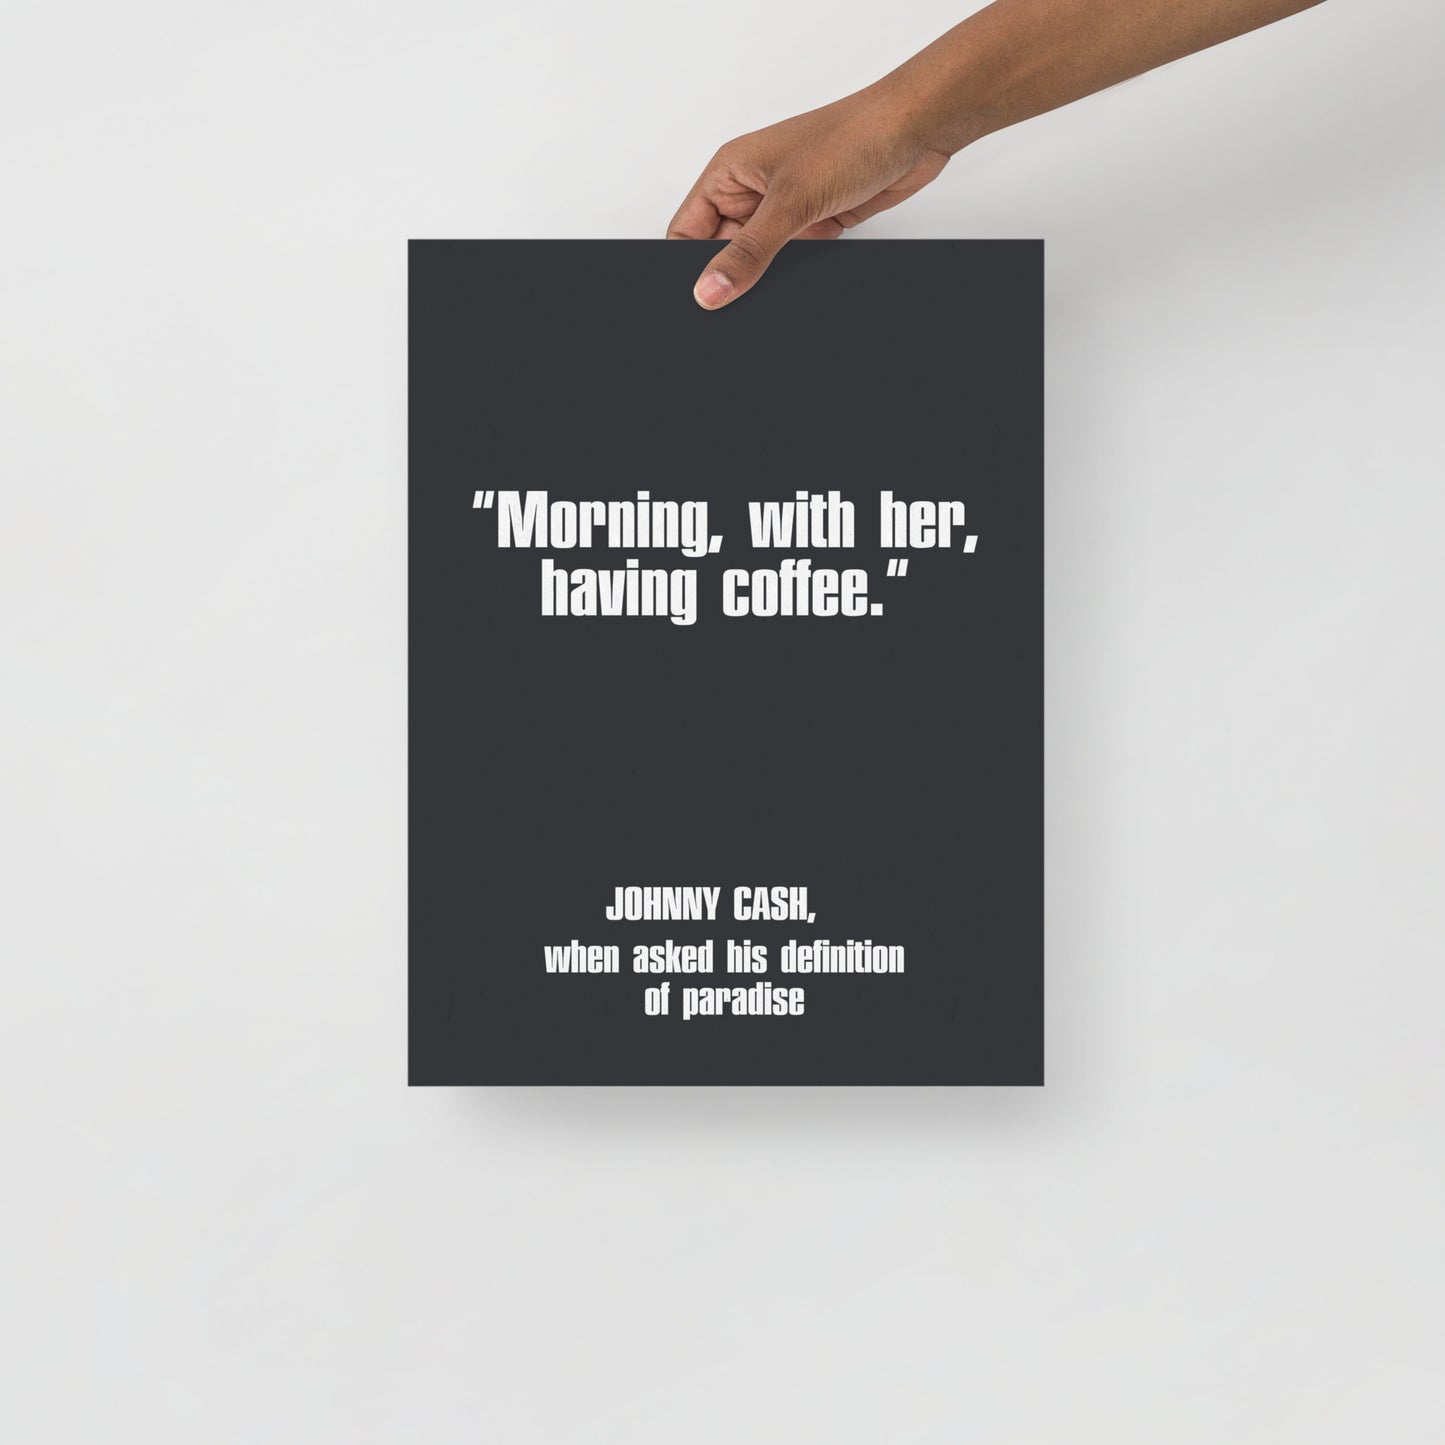 Johnny Cash Quote Poster